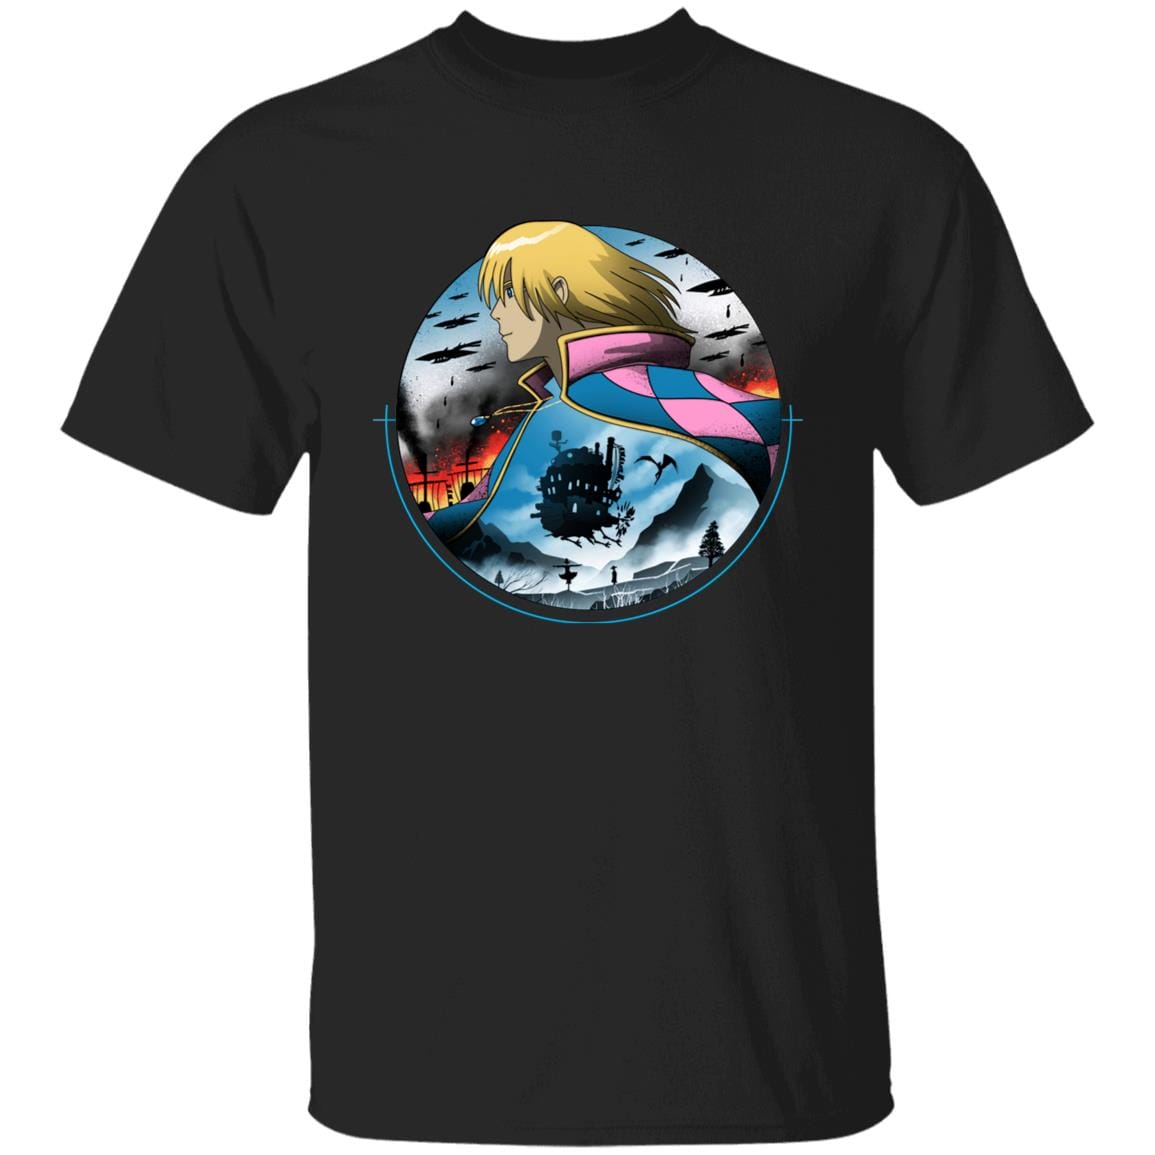 Howl’s Moving Castle – The Journey T Shirt